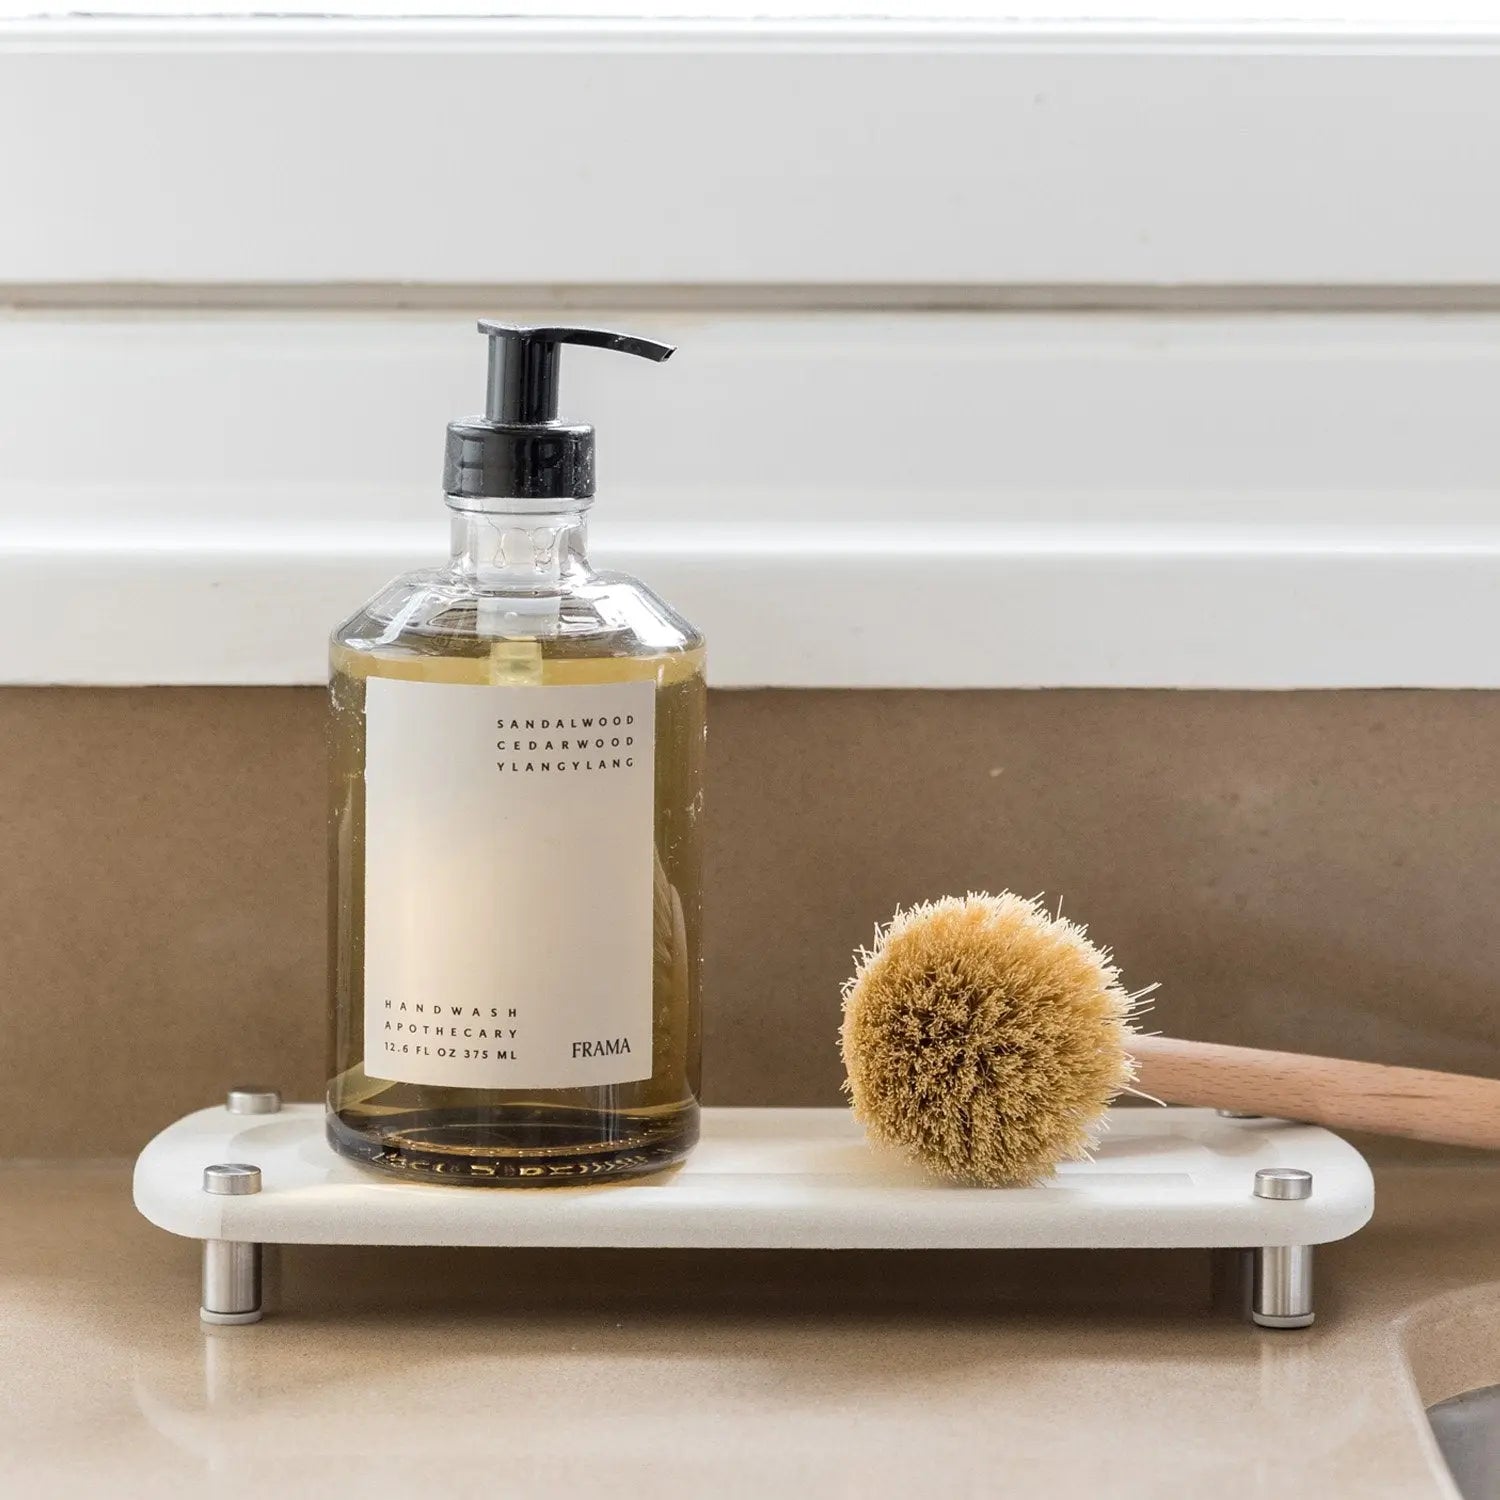 Soap and brush on sink caddy